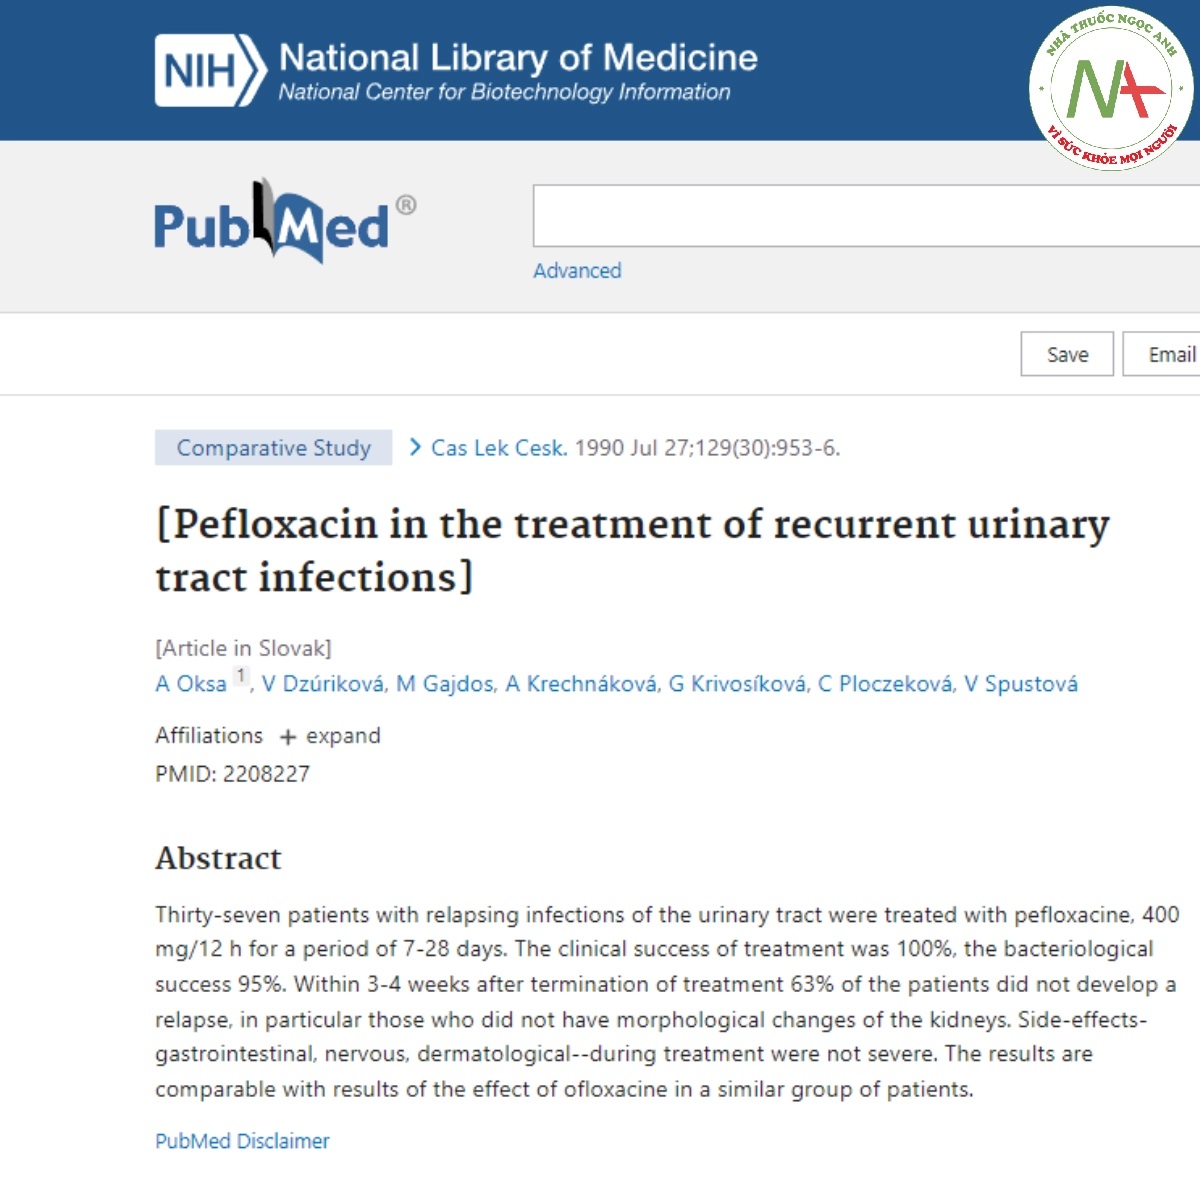 Pefloxacin in the treatment of recurrent urinary tract infections